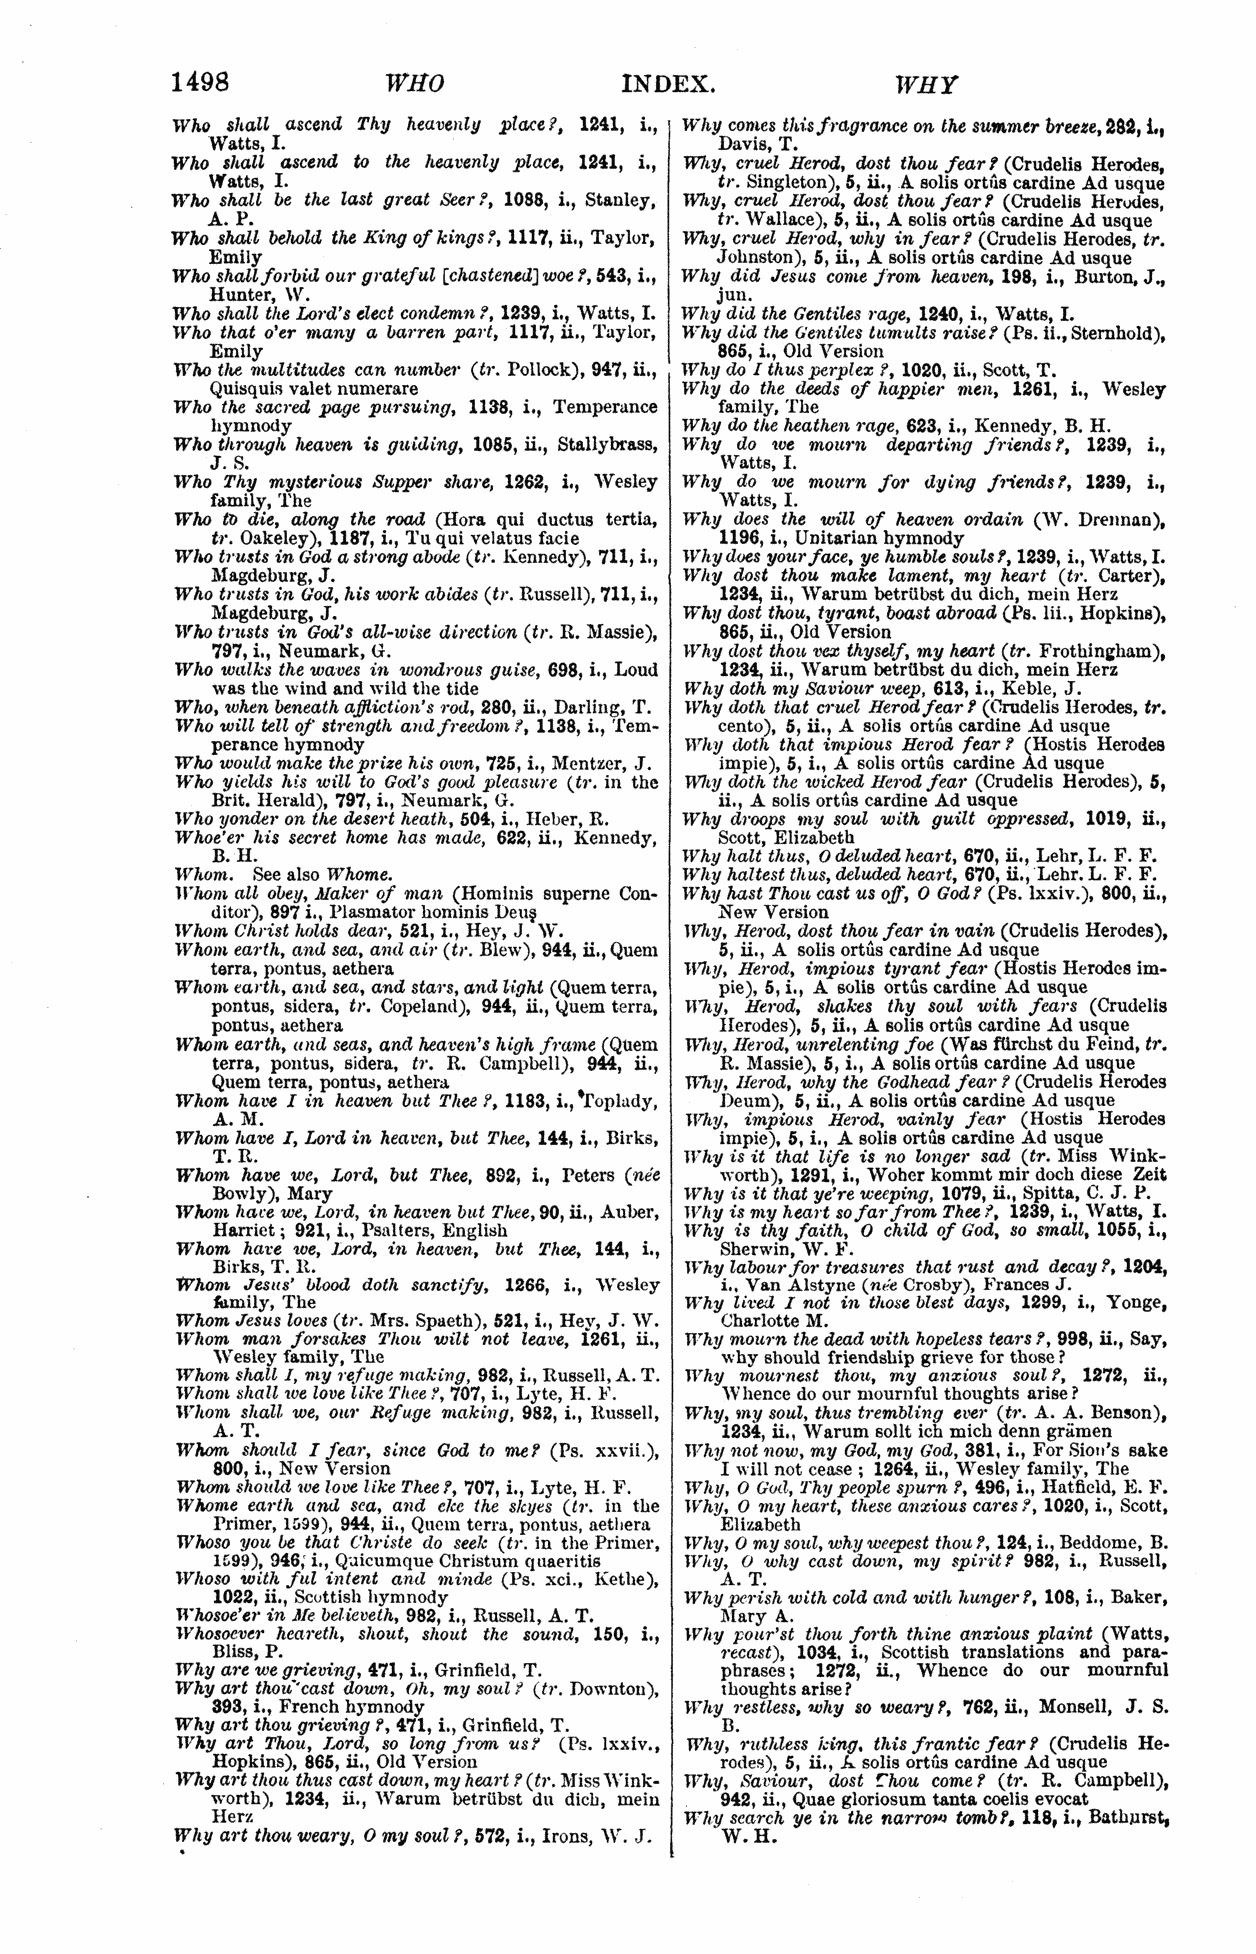 Image of page 1498